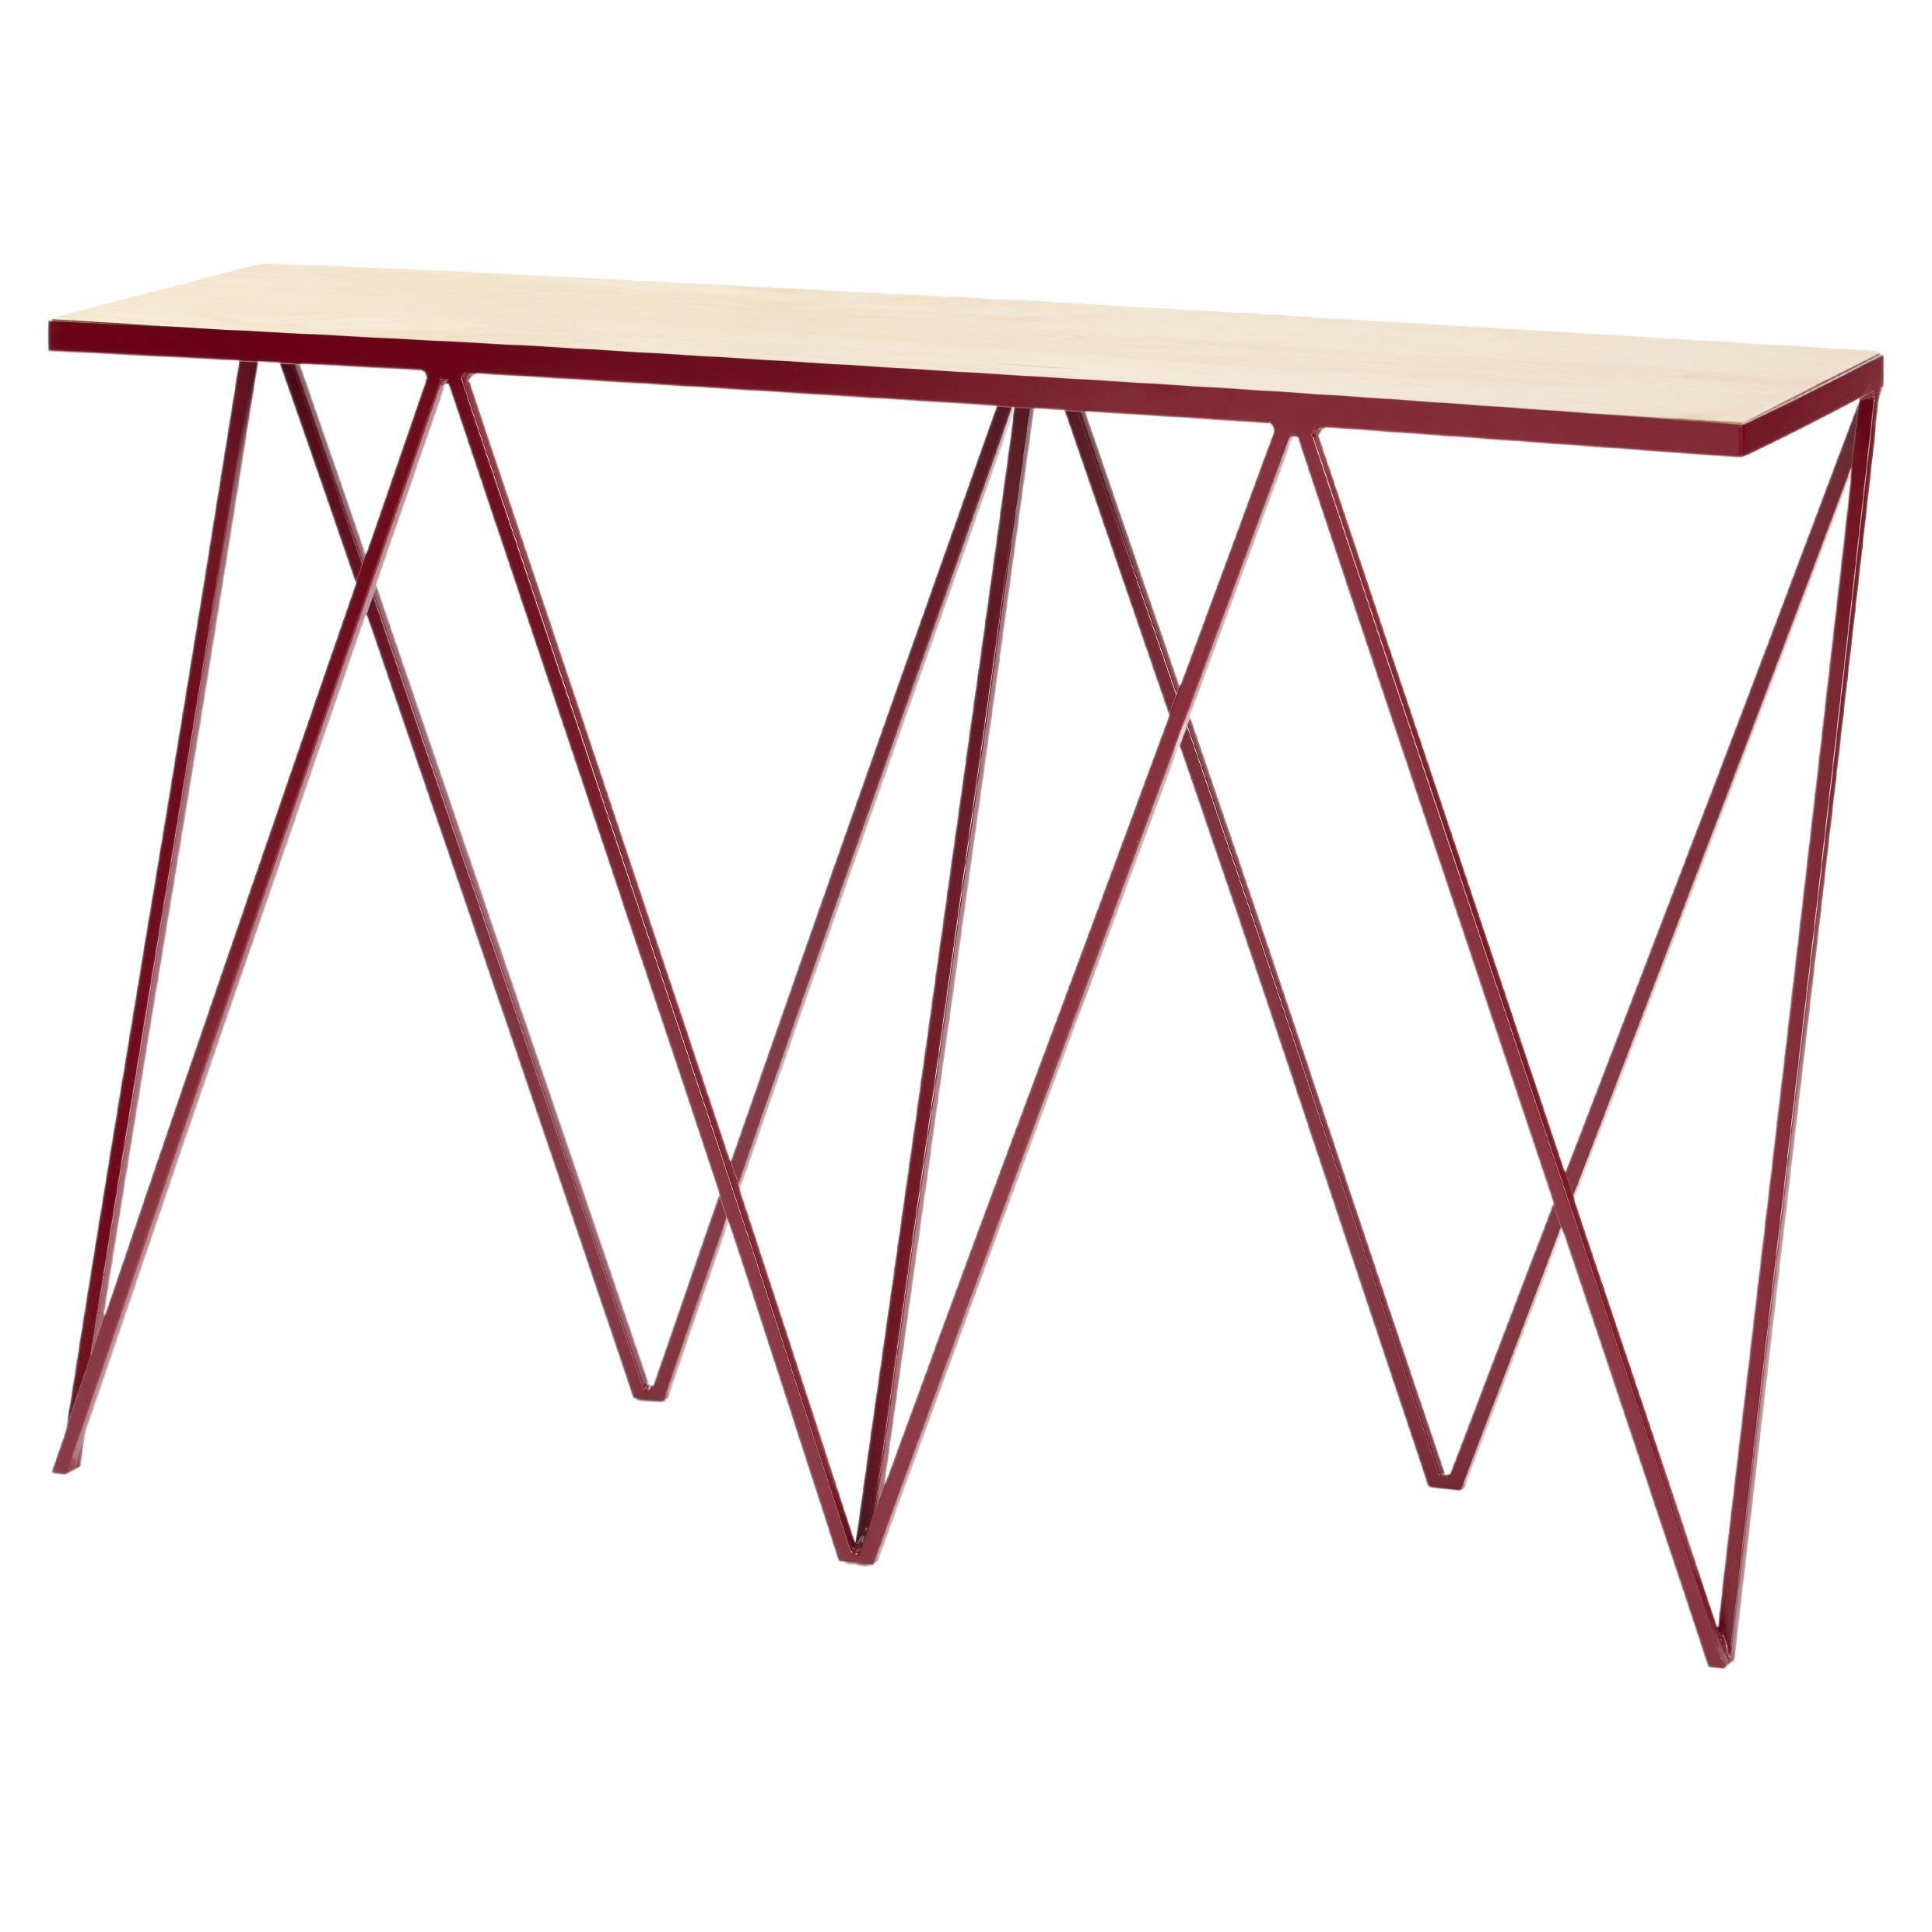 Slim Burgundy Steel Console Table with Wood Table Top / Customizable